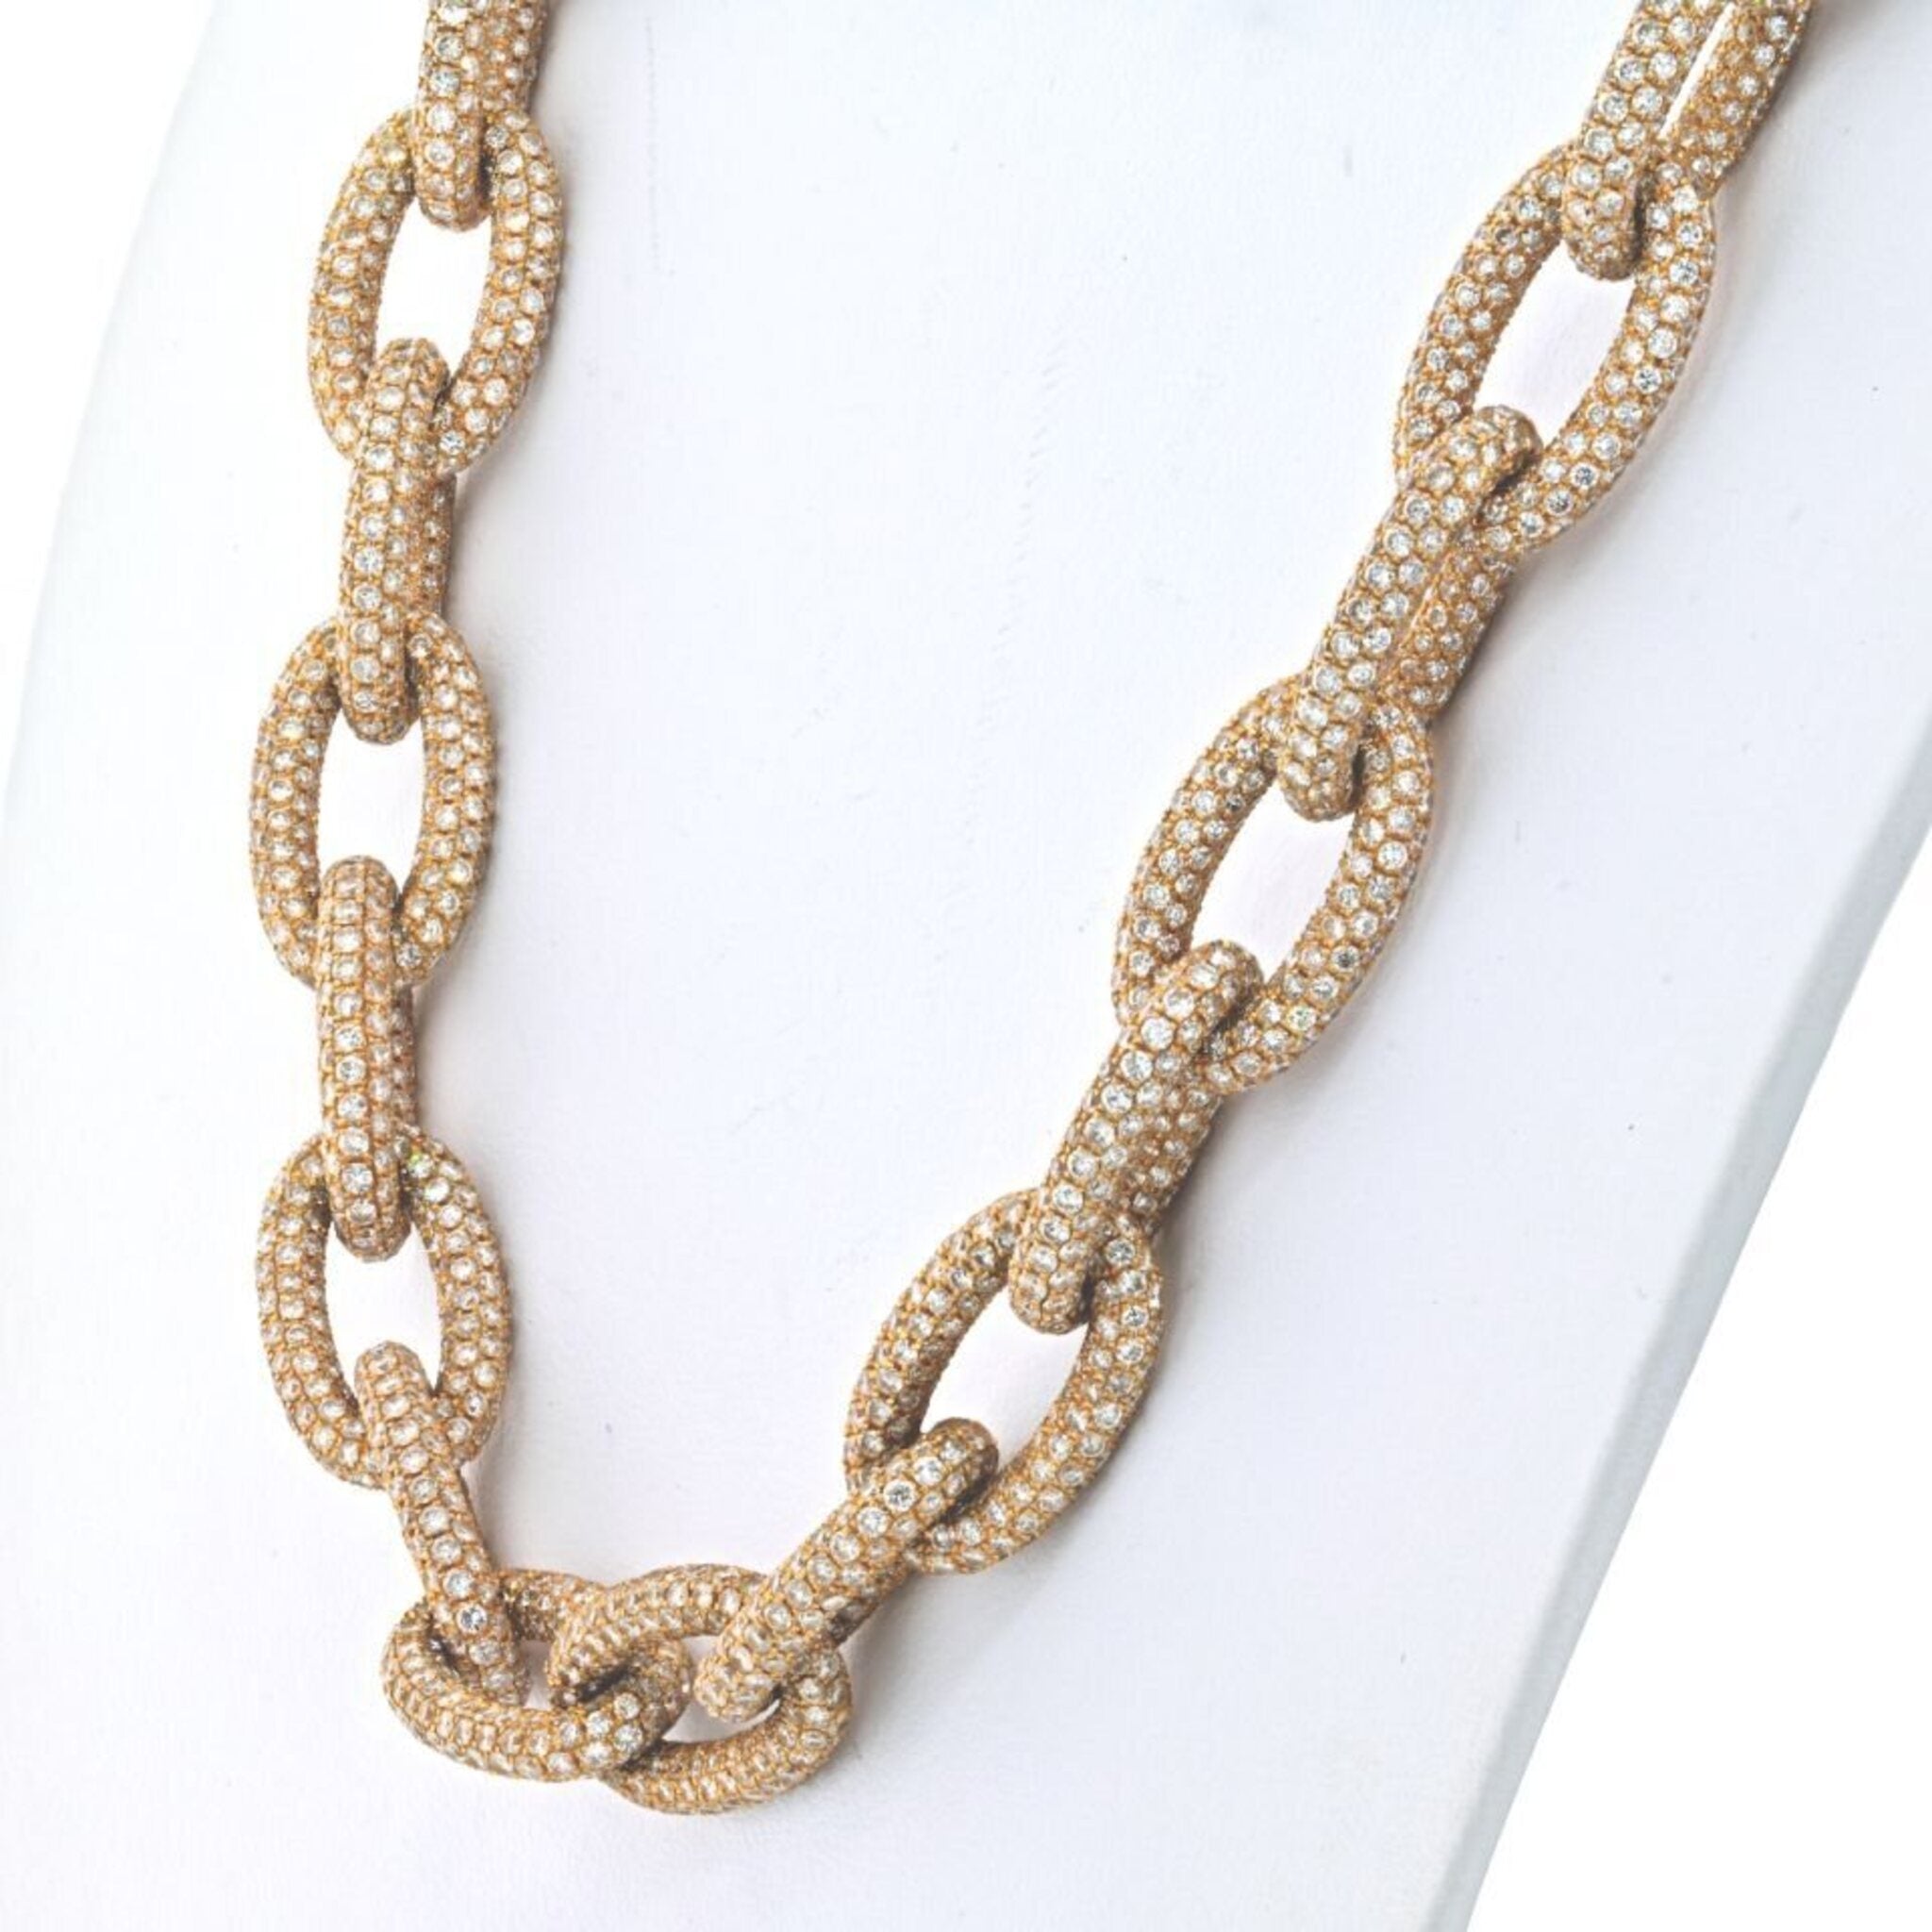 18K Yellow Gold 85 Carat Oval Diamond Link Chain Necklace